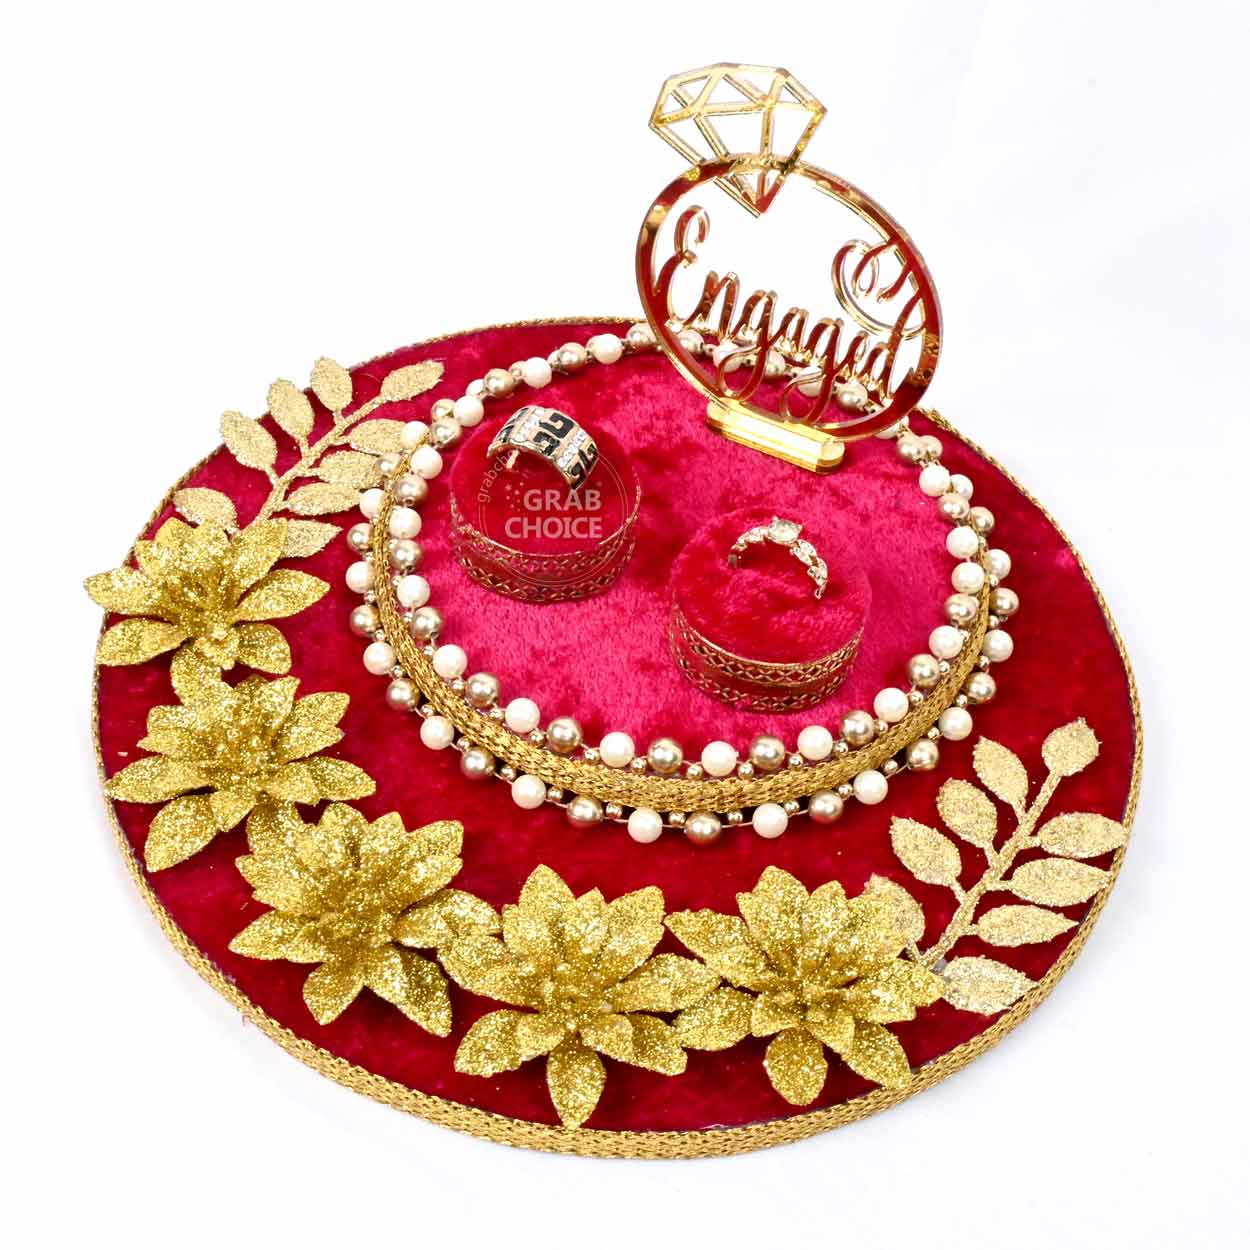 Buy GiftsBouquet Smart Creations Decorative Engagement Ring Platter for Ring  Ceremony Tray Online at Low Prices in India - Amazon.in